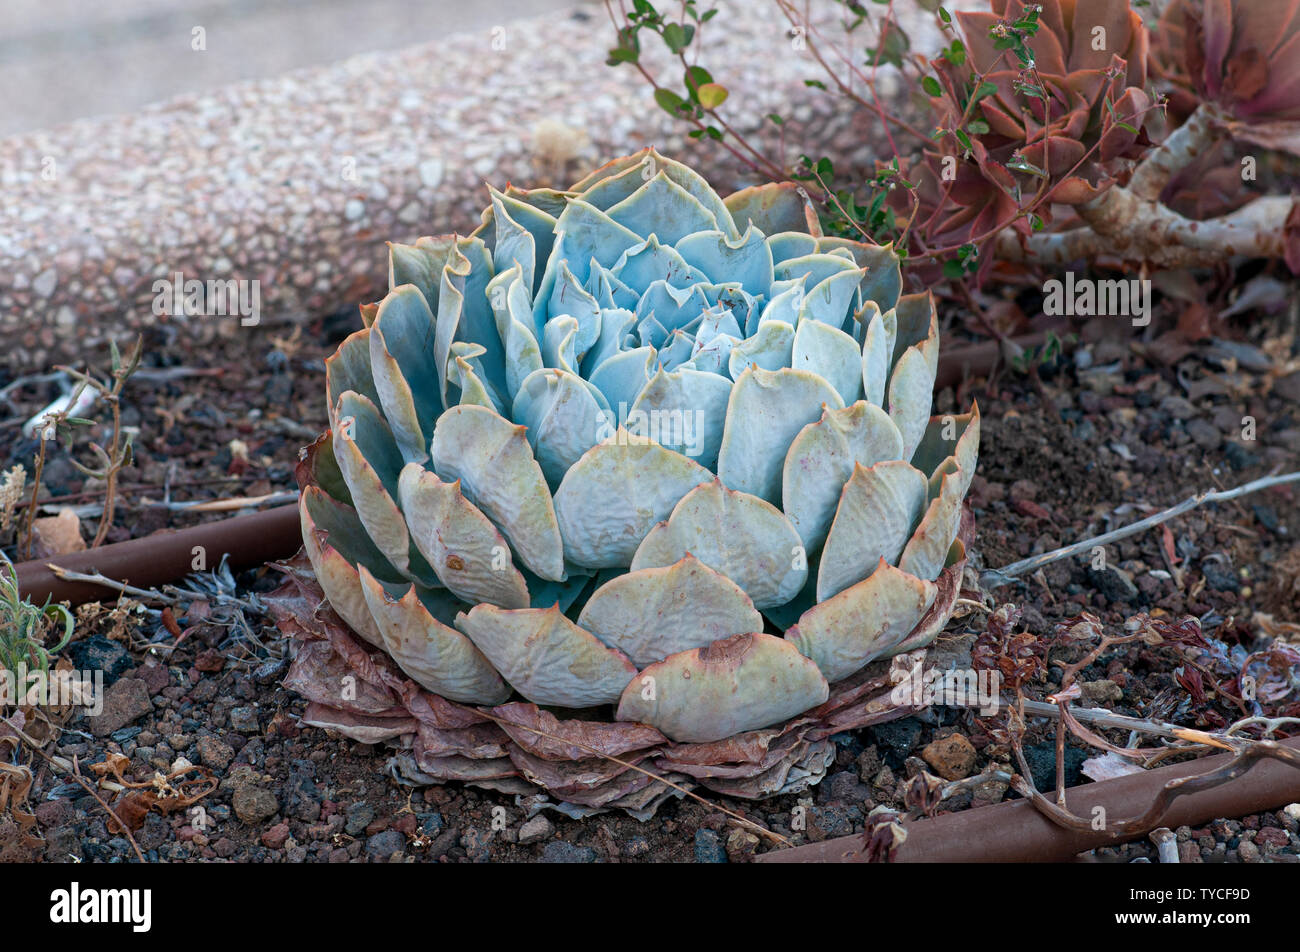 Echeveria Encantada is an impressive succulent up to 8 inches (20 cm) tall, that forms rosettes of fleshy, teardrop-shaped leaves with a frosty, white Stock Photo